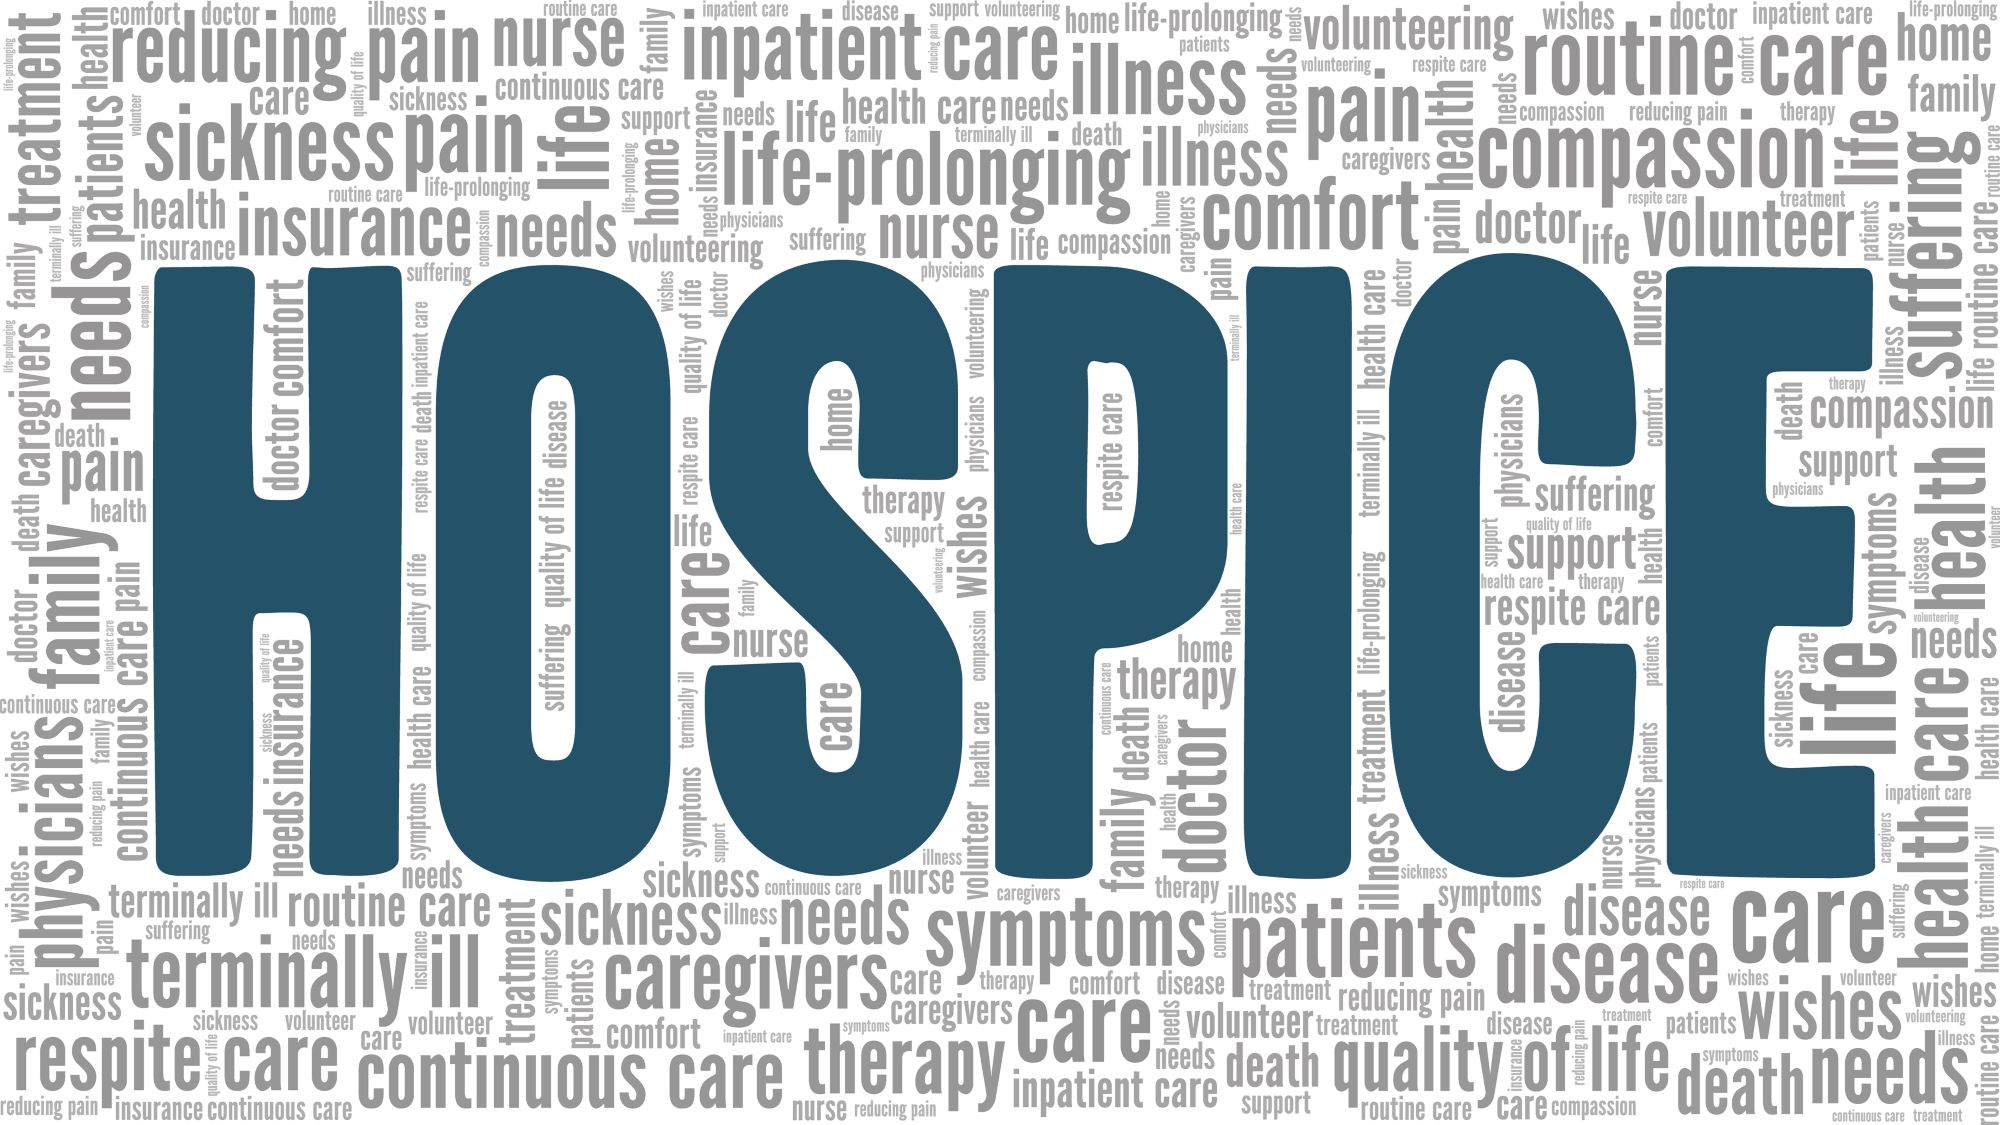 Hospice Care: 10 Facts You Didn't Know